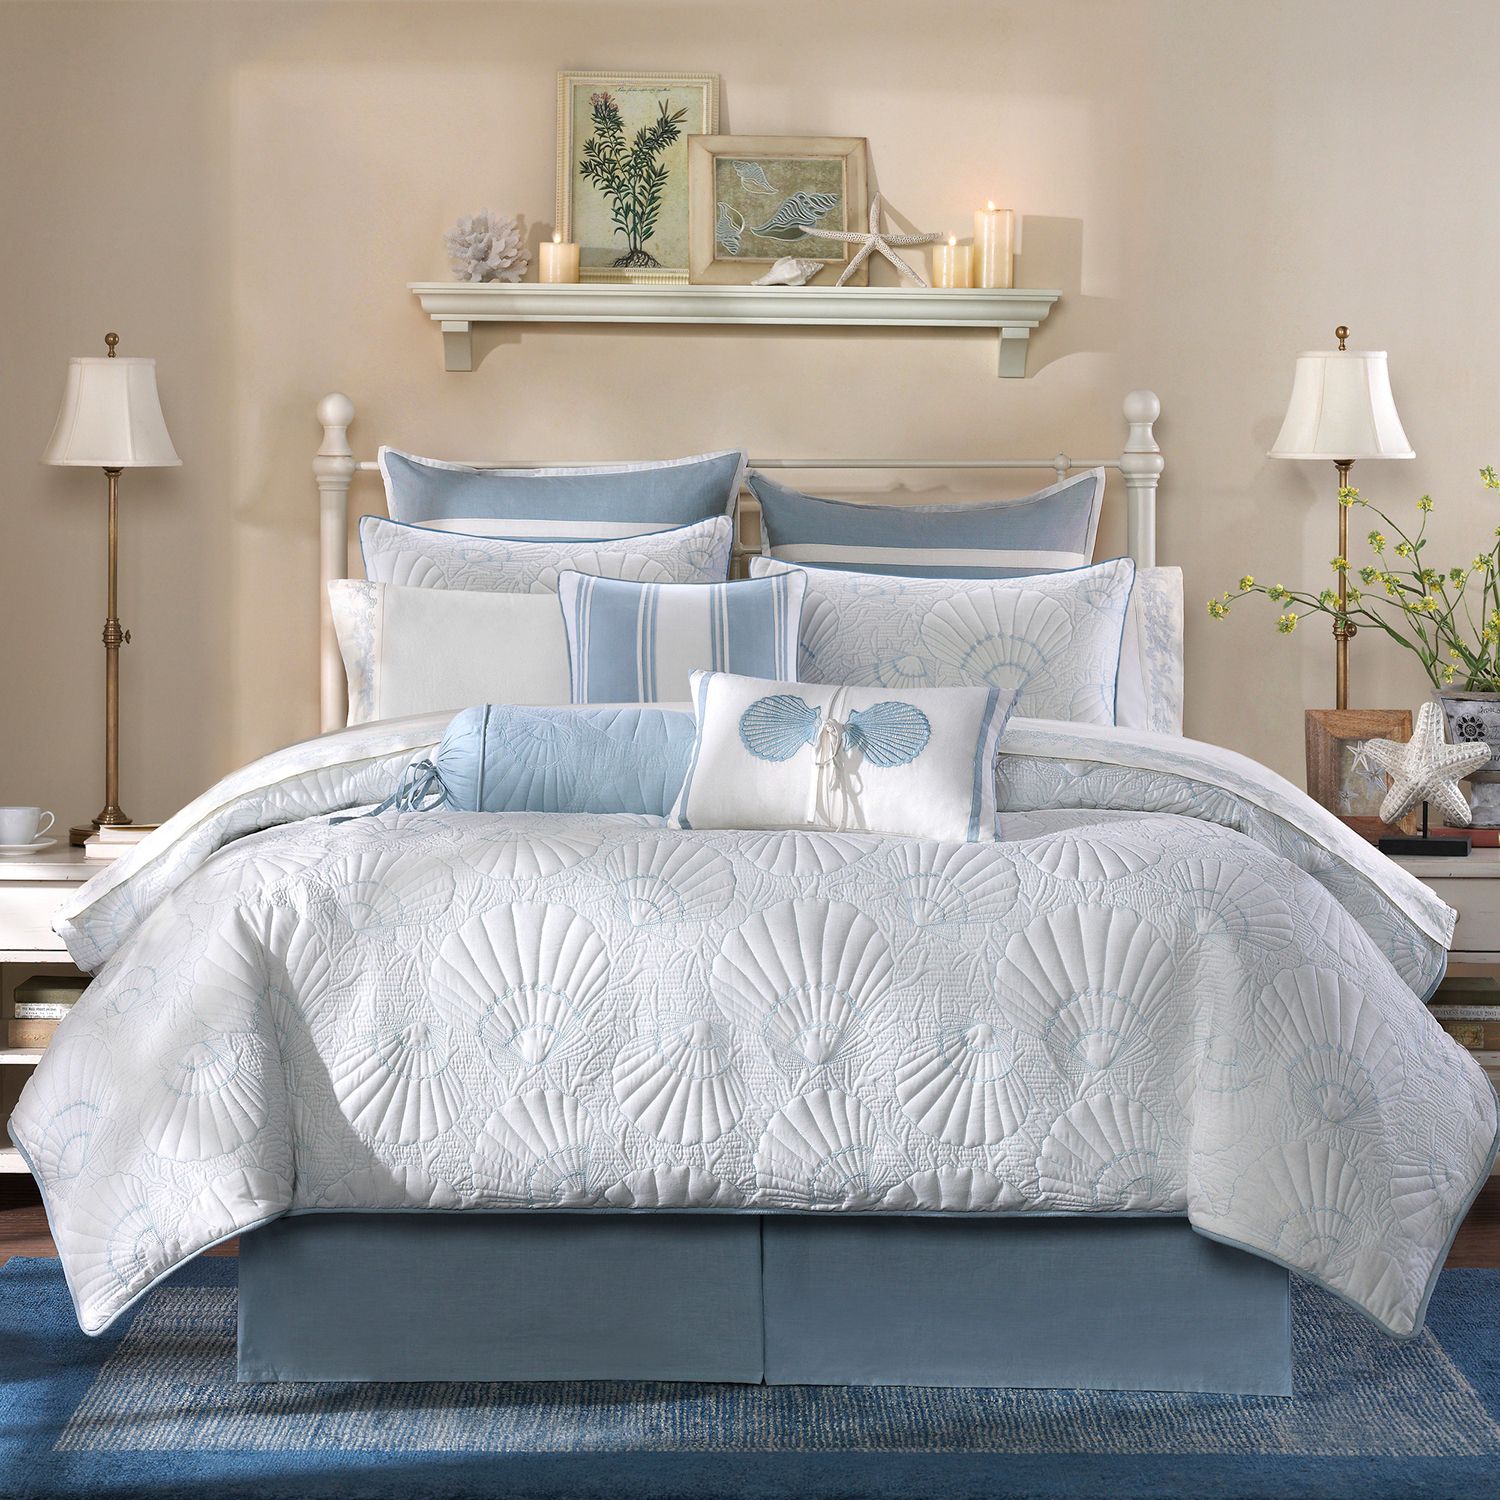 Image for Harbor House Crystal Beach Comforter Collection at Kohl's.